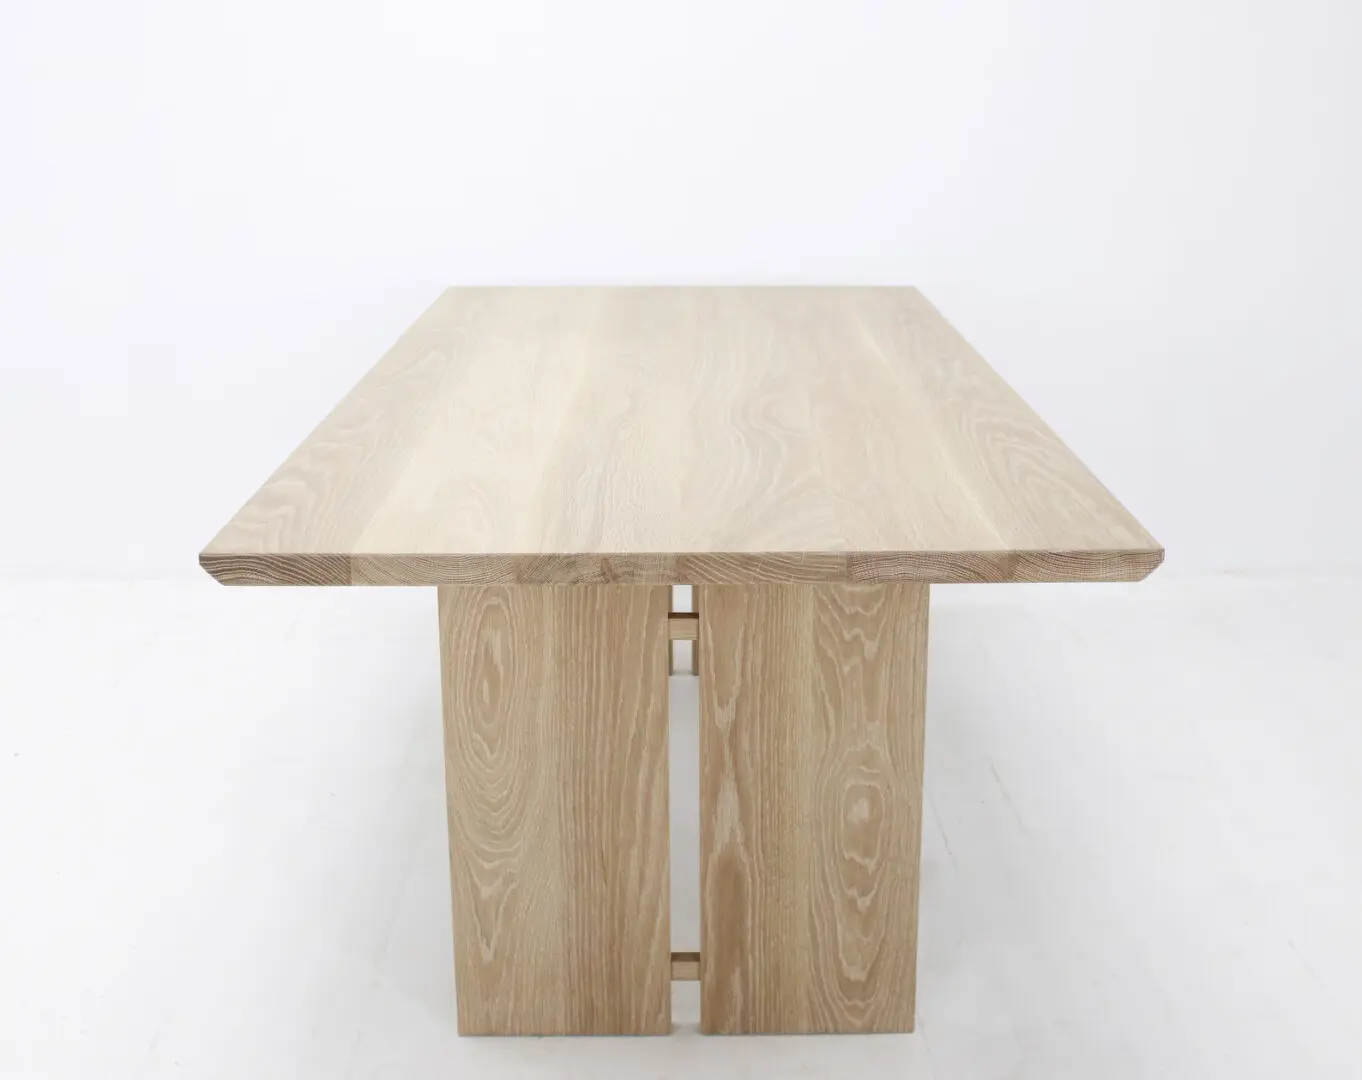 A wooden table with split panel legs.